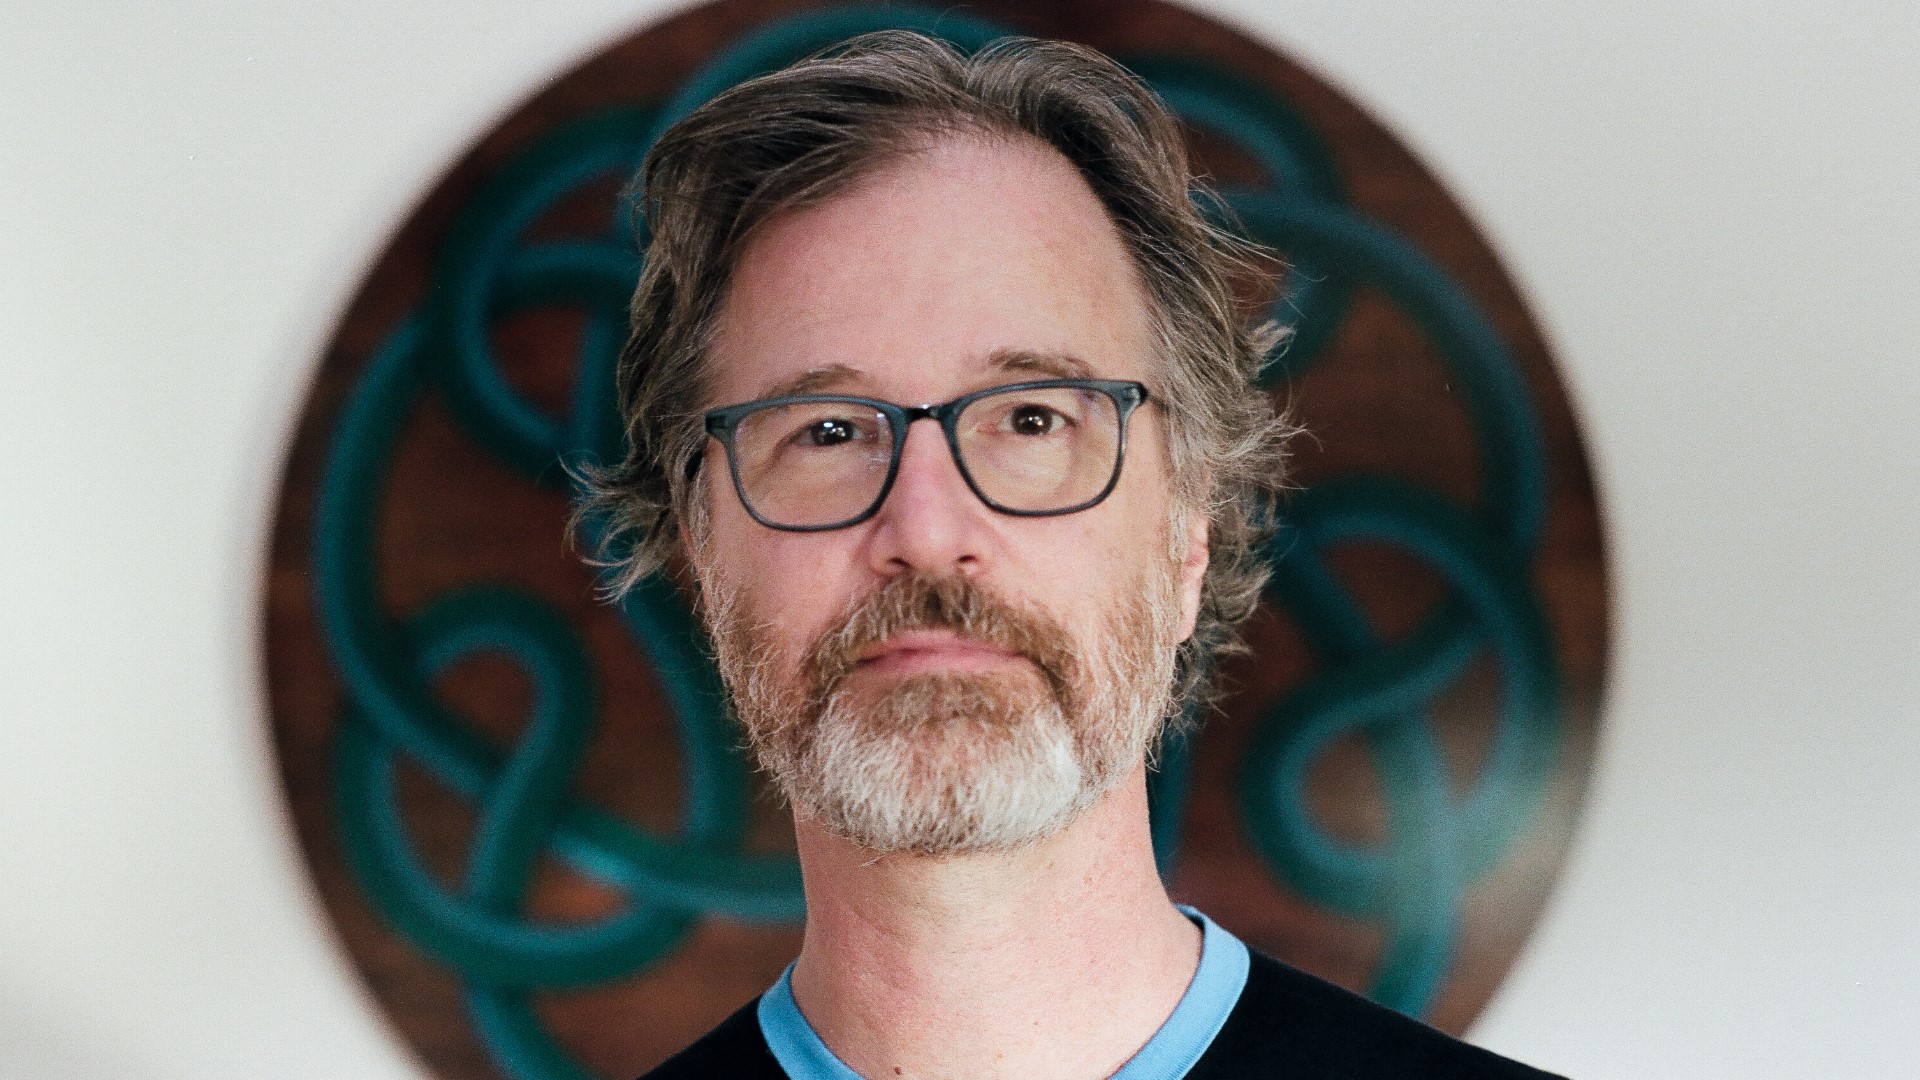 Dan Wilson, who first found fame with Minneapolis-based Semisonic, is getting ready to play a big hometown show —but not before he vies for an Academy Award Sunday.